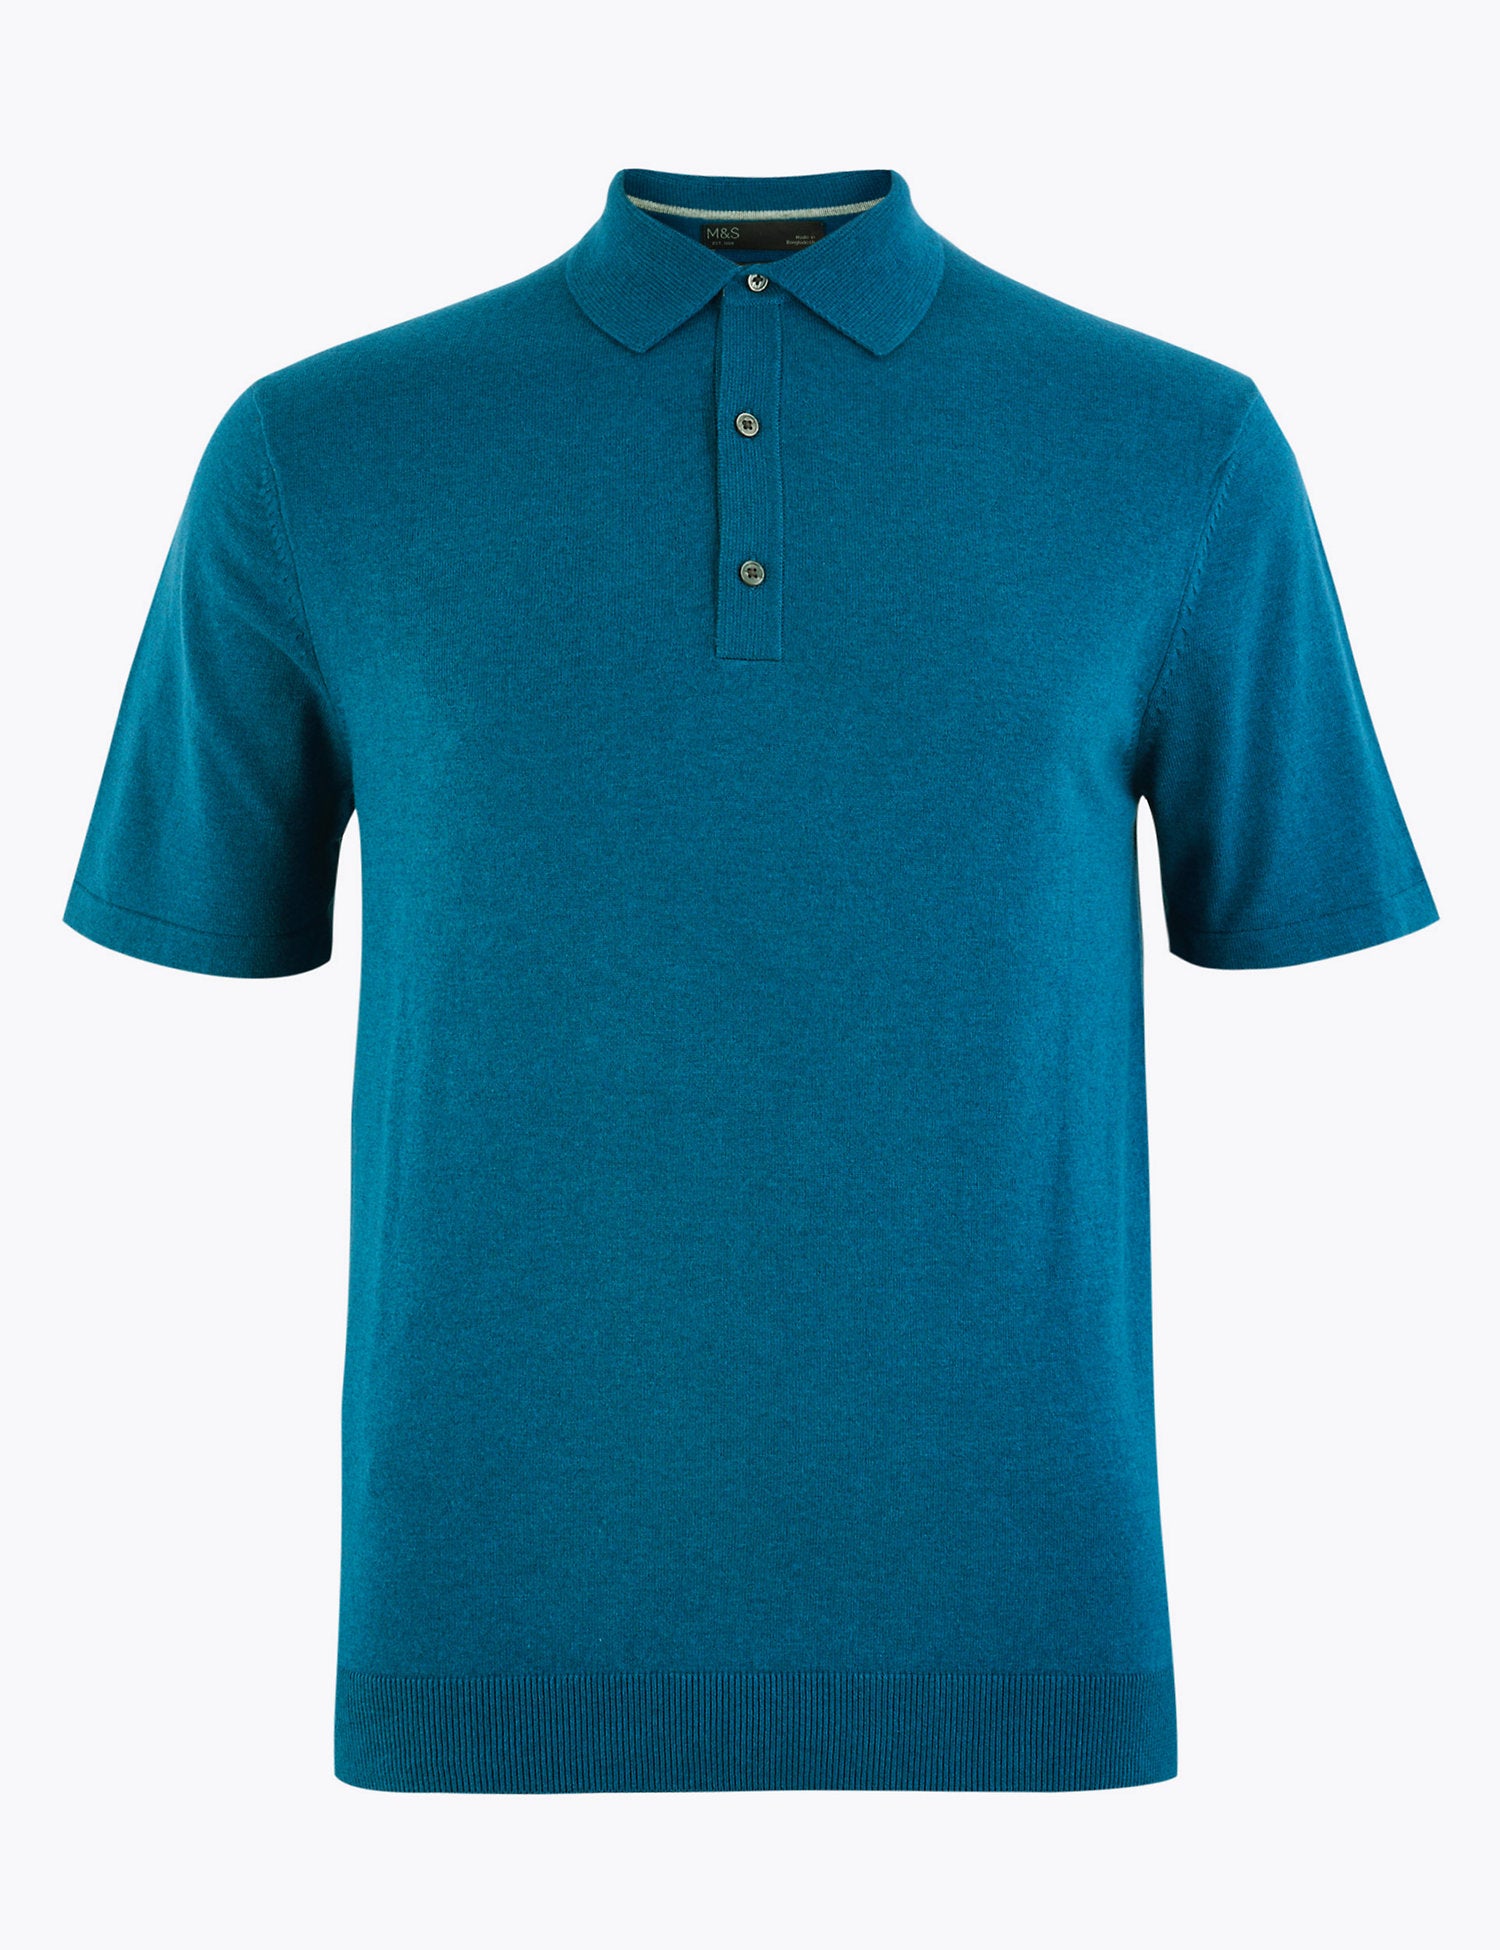 Cotton Short Sleeve Knitted Polo Shirt